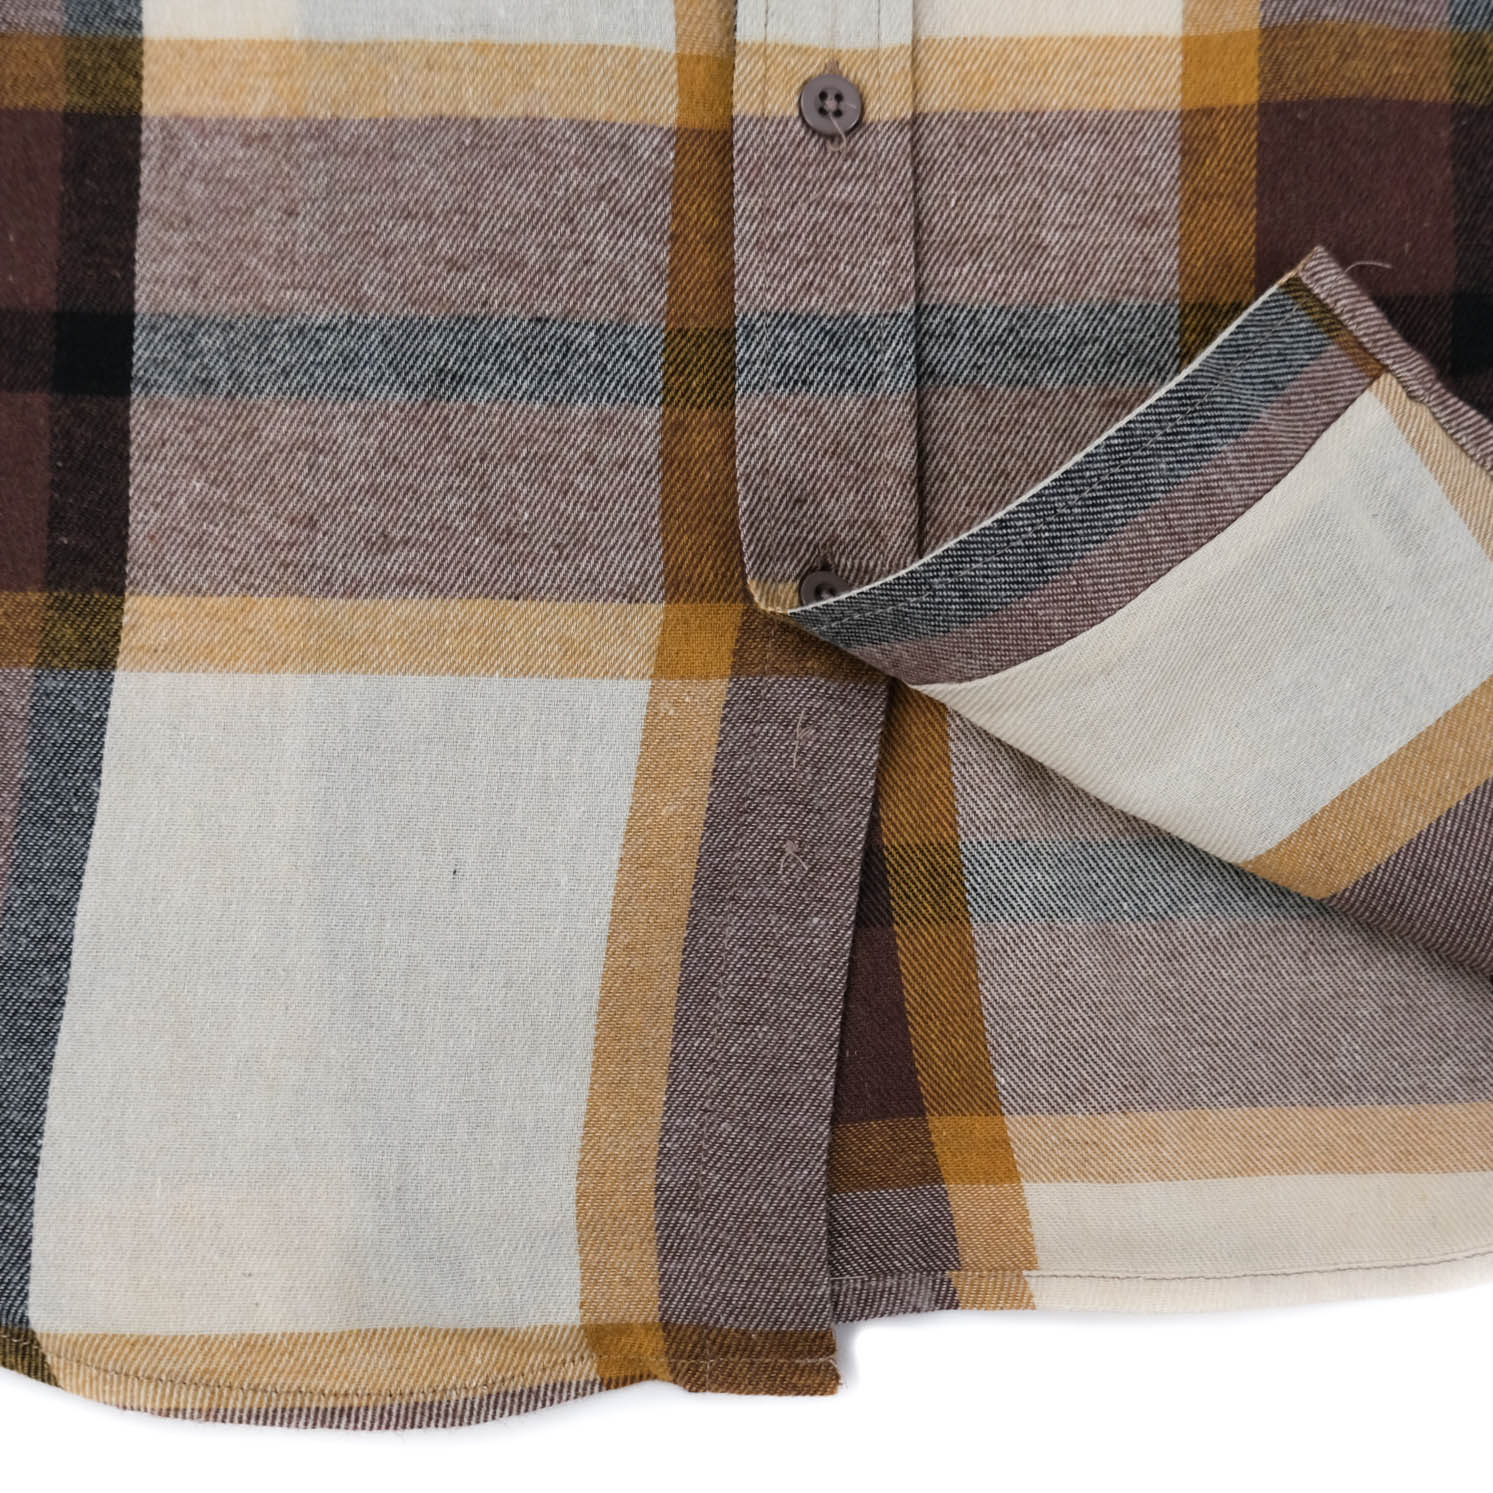 product image Fordham Flannel - Brown